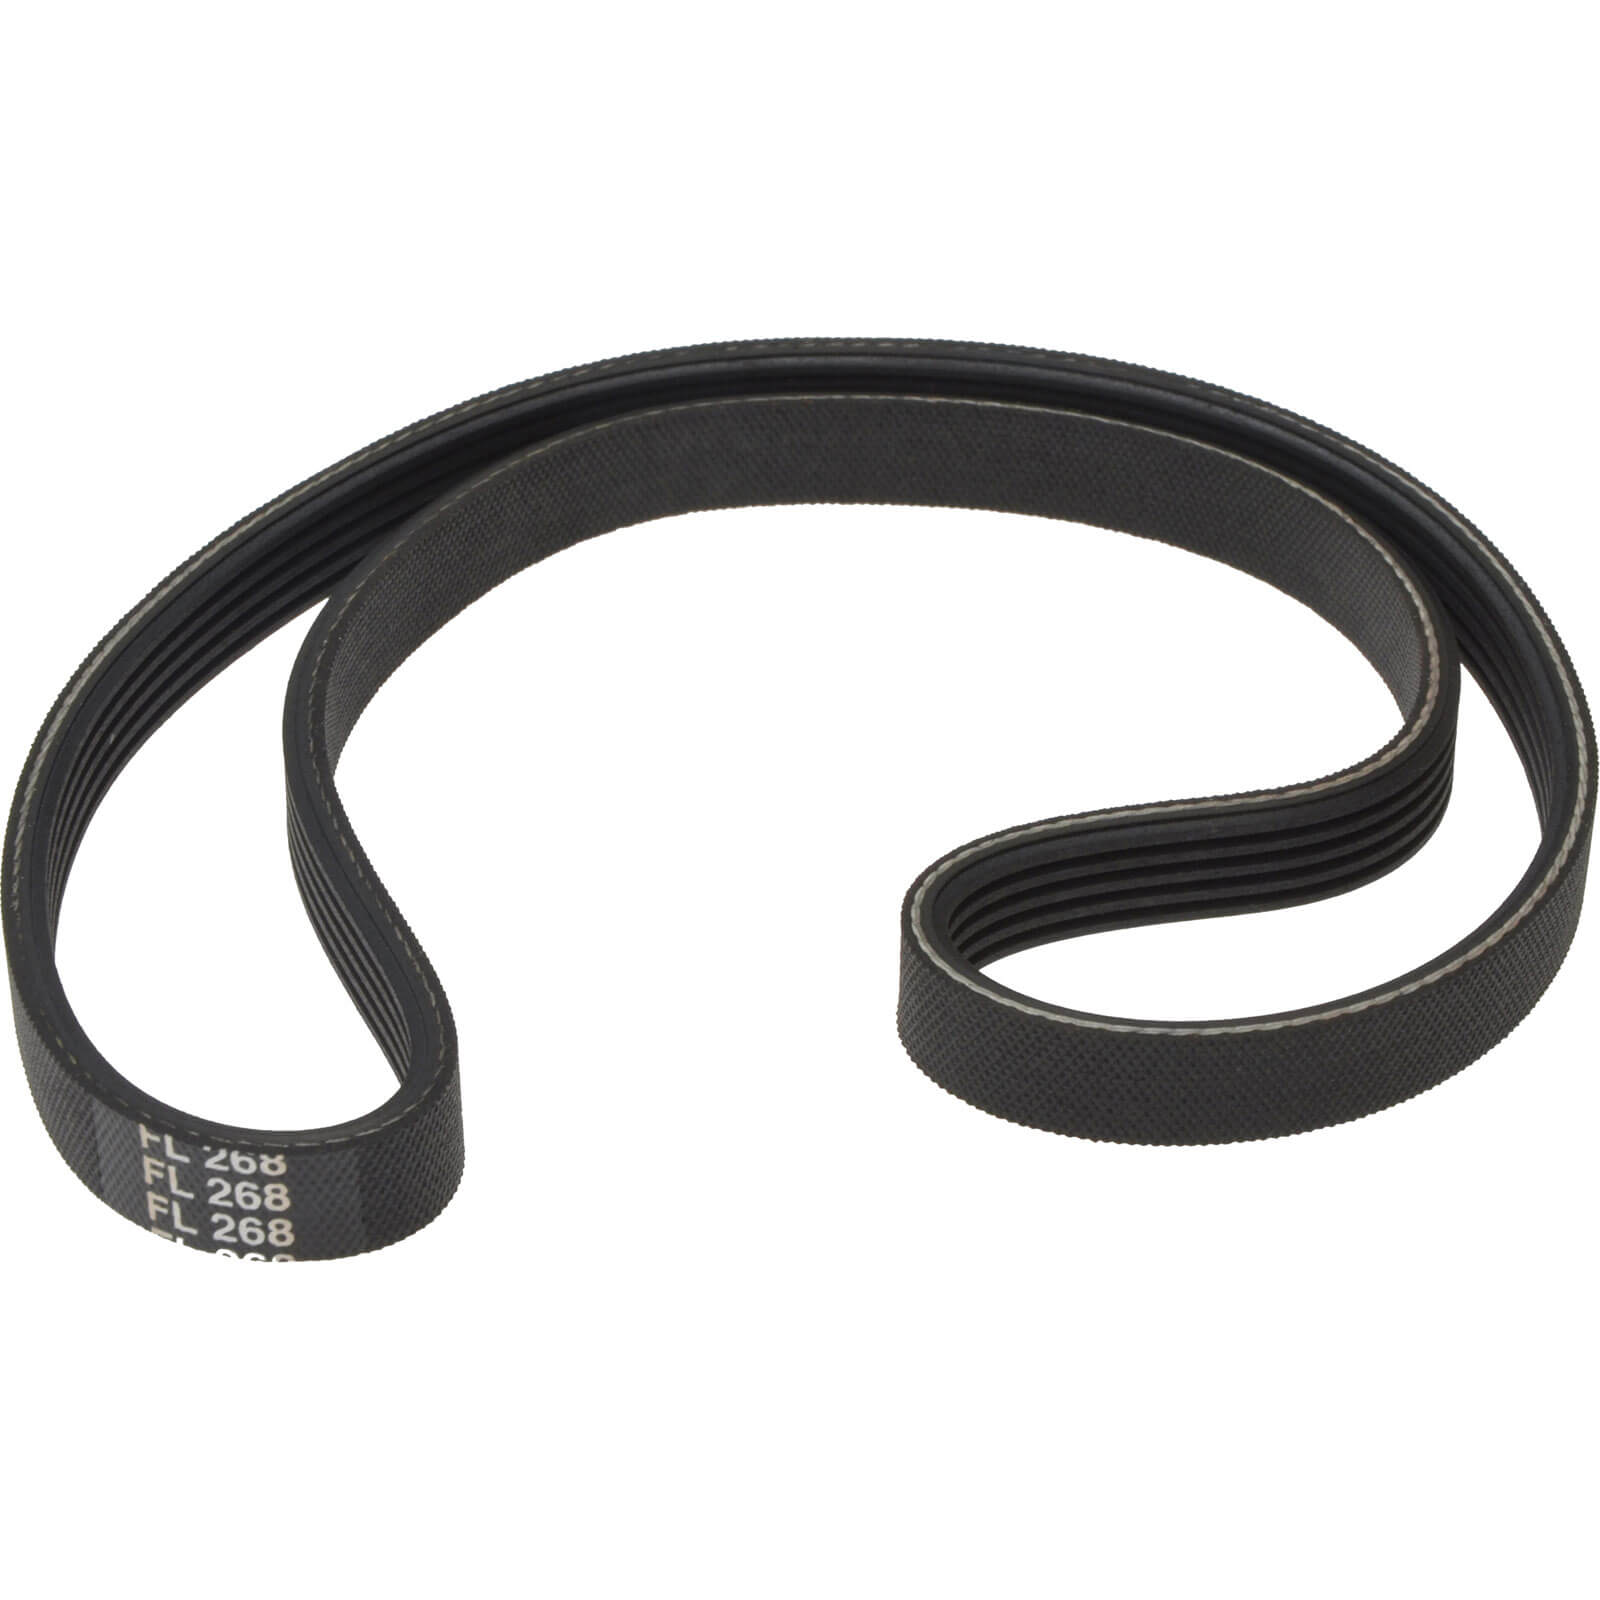 Image of ALM FL268 Drive Belt for Flymo Turbo Compact